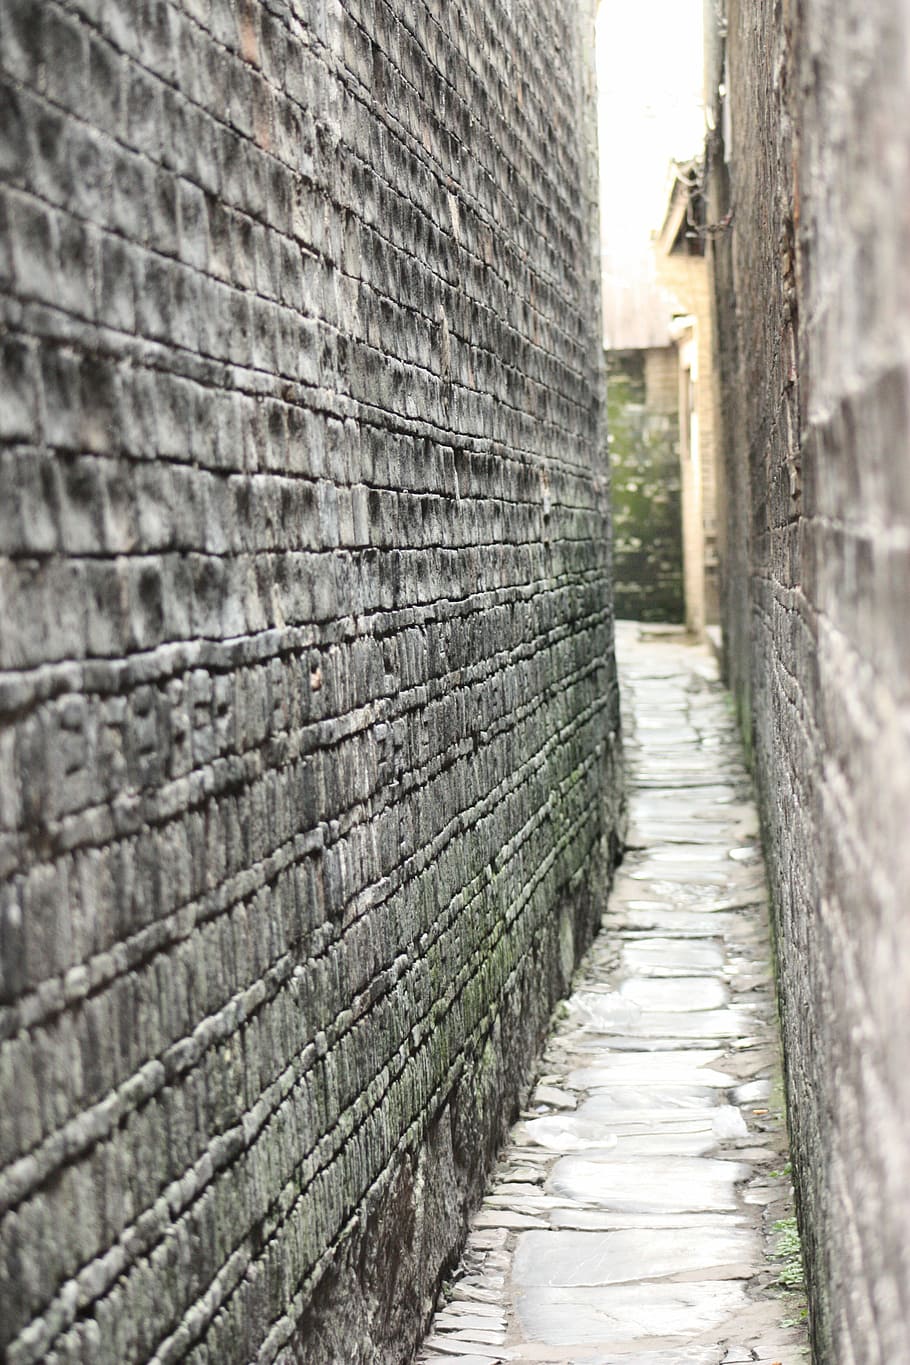 Alleyway, China, narrow, brick wall, built structure, history, architecture, day, wall, direction